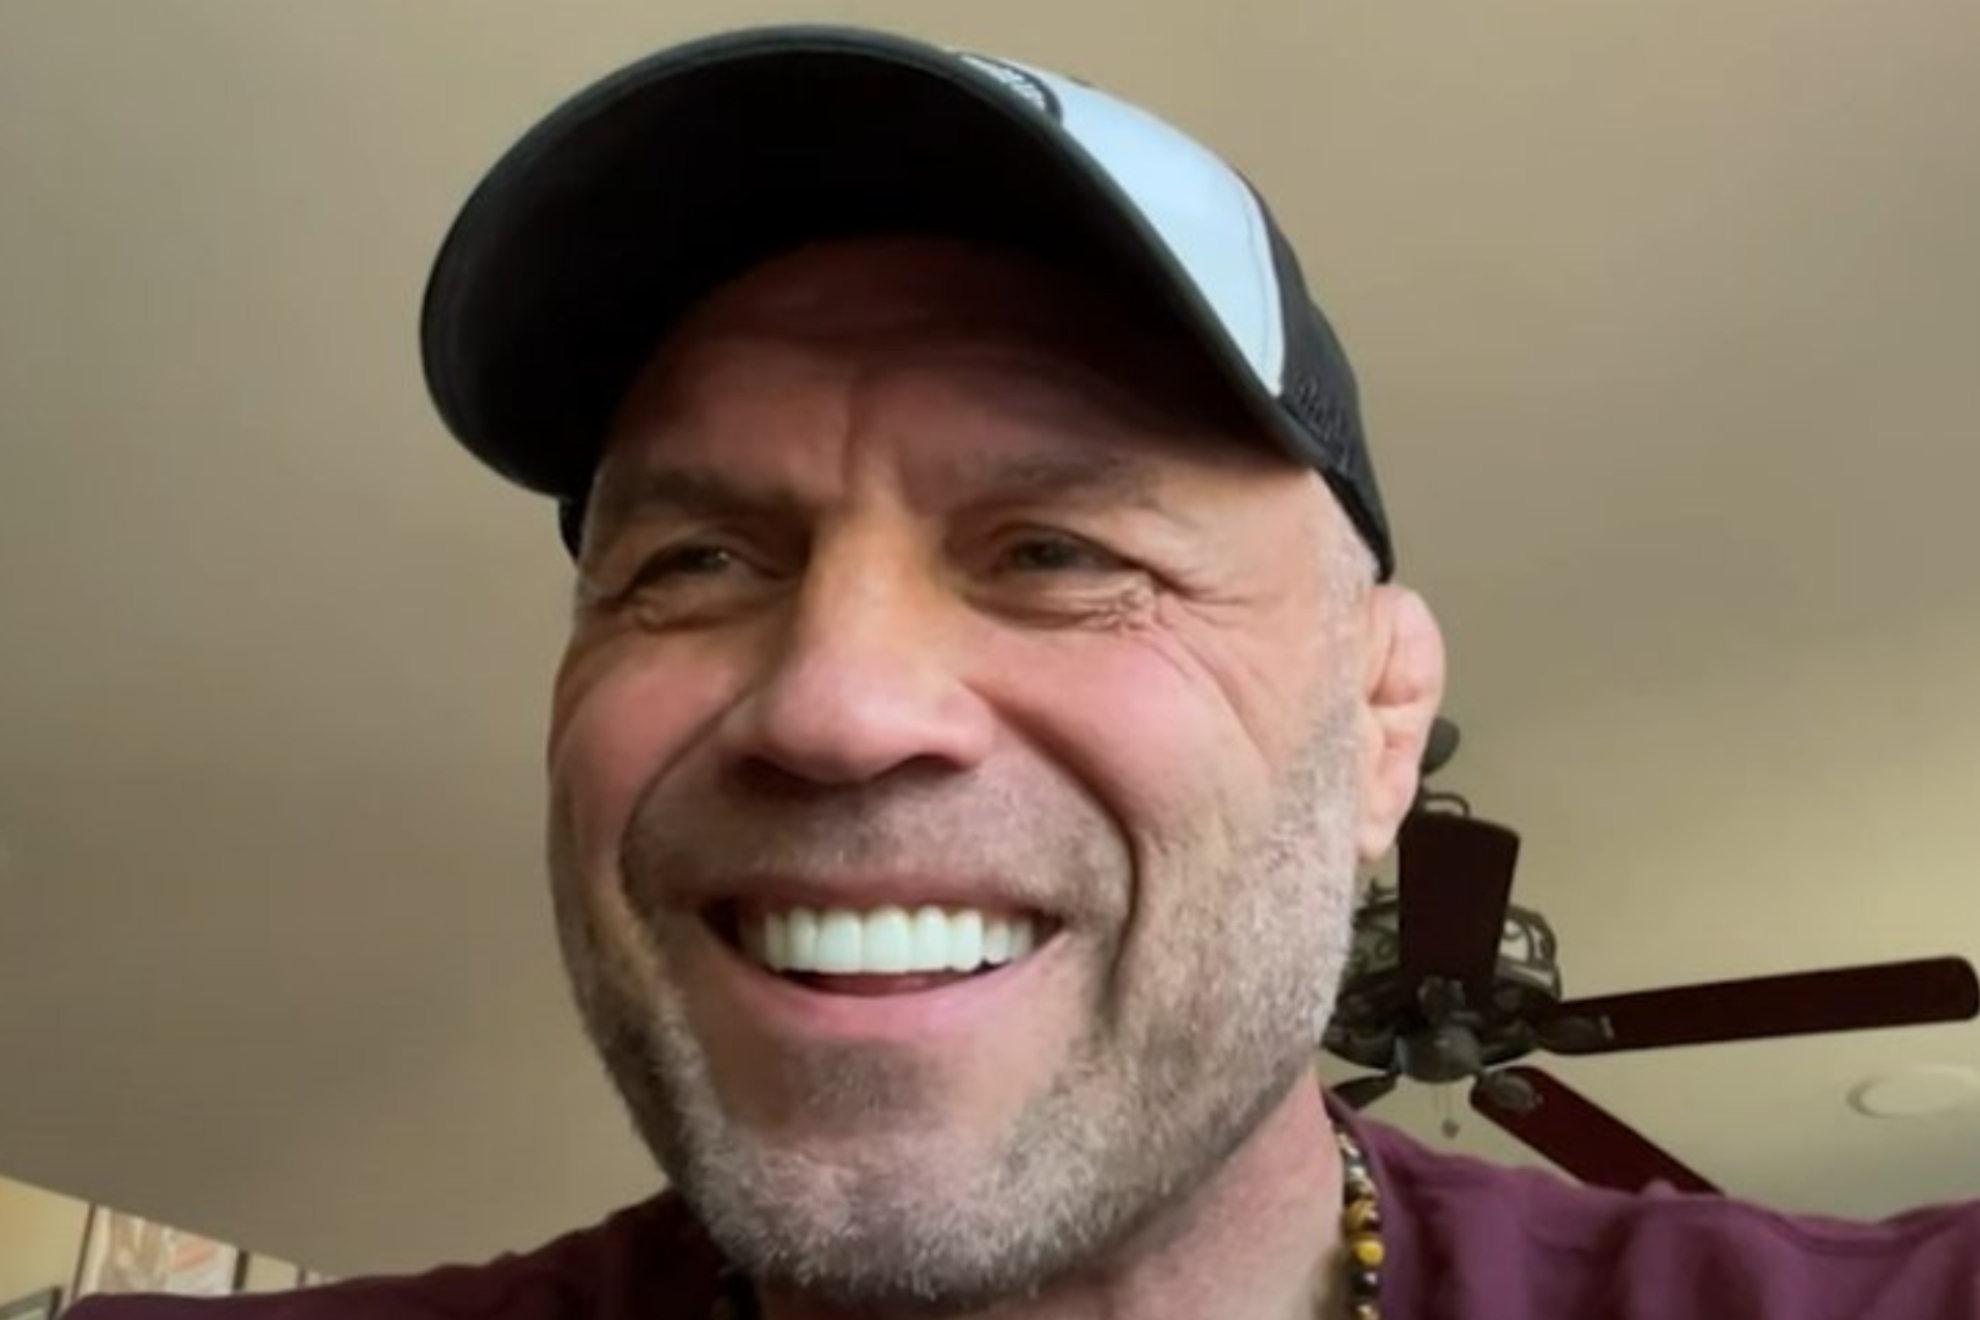 UFC legend Randy Couture warns about the dangers Jake Paul will face fighting Mike Tyson